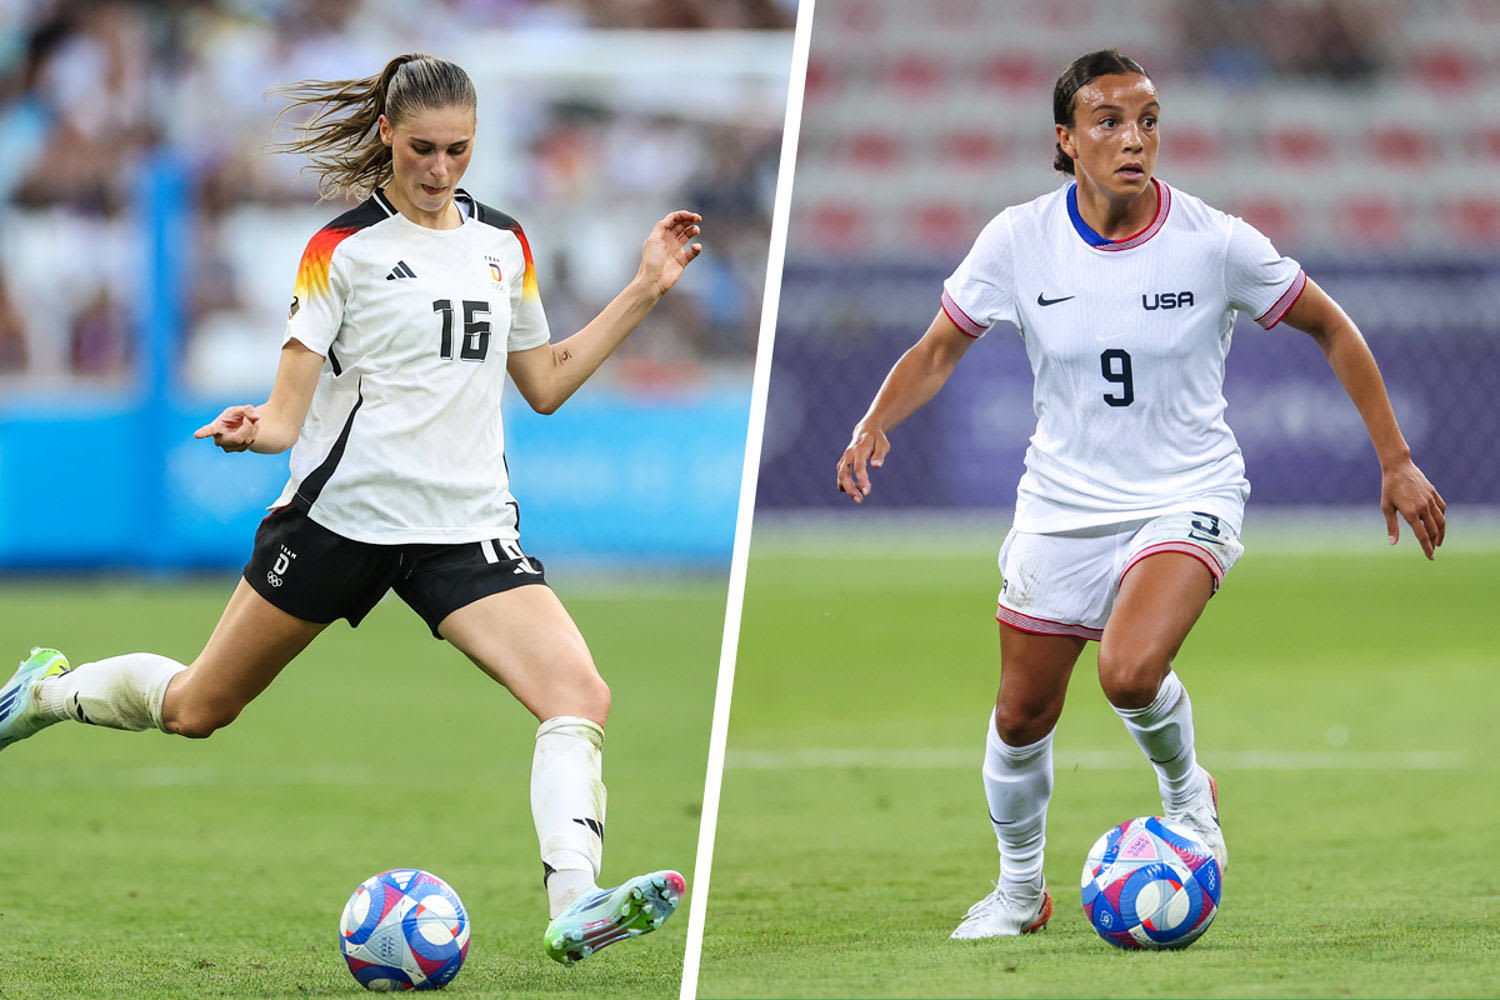 U.S. women's soccer team leads group after 4-1 victory over Germany